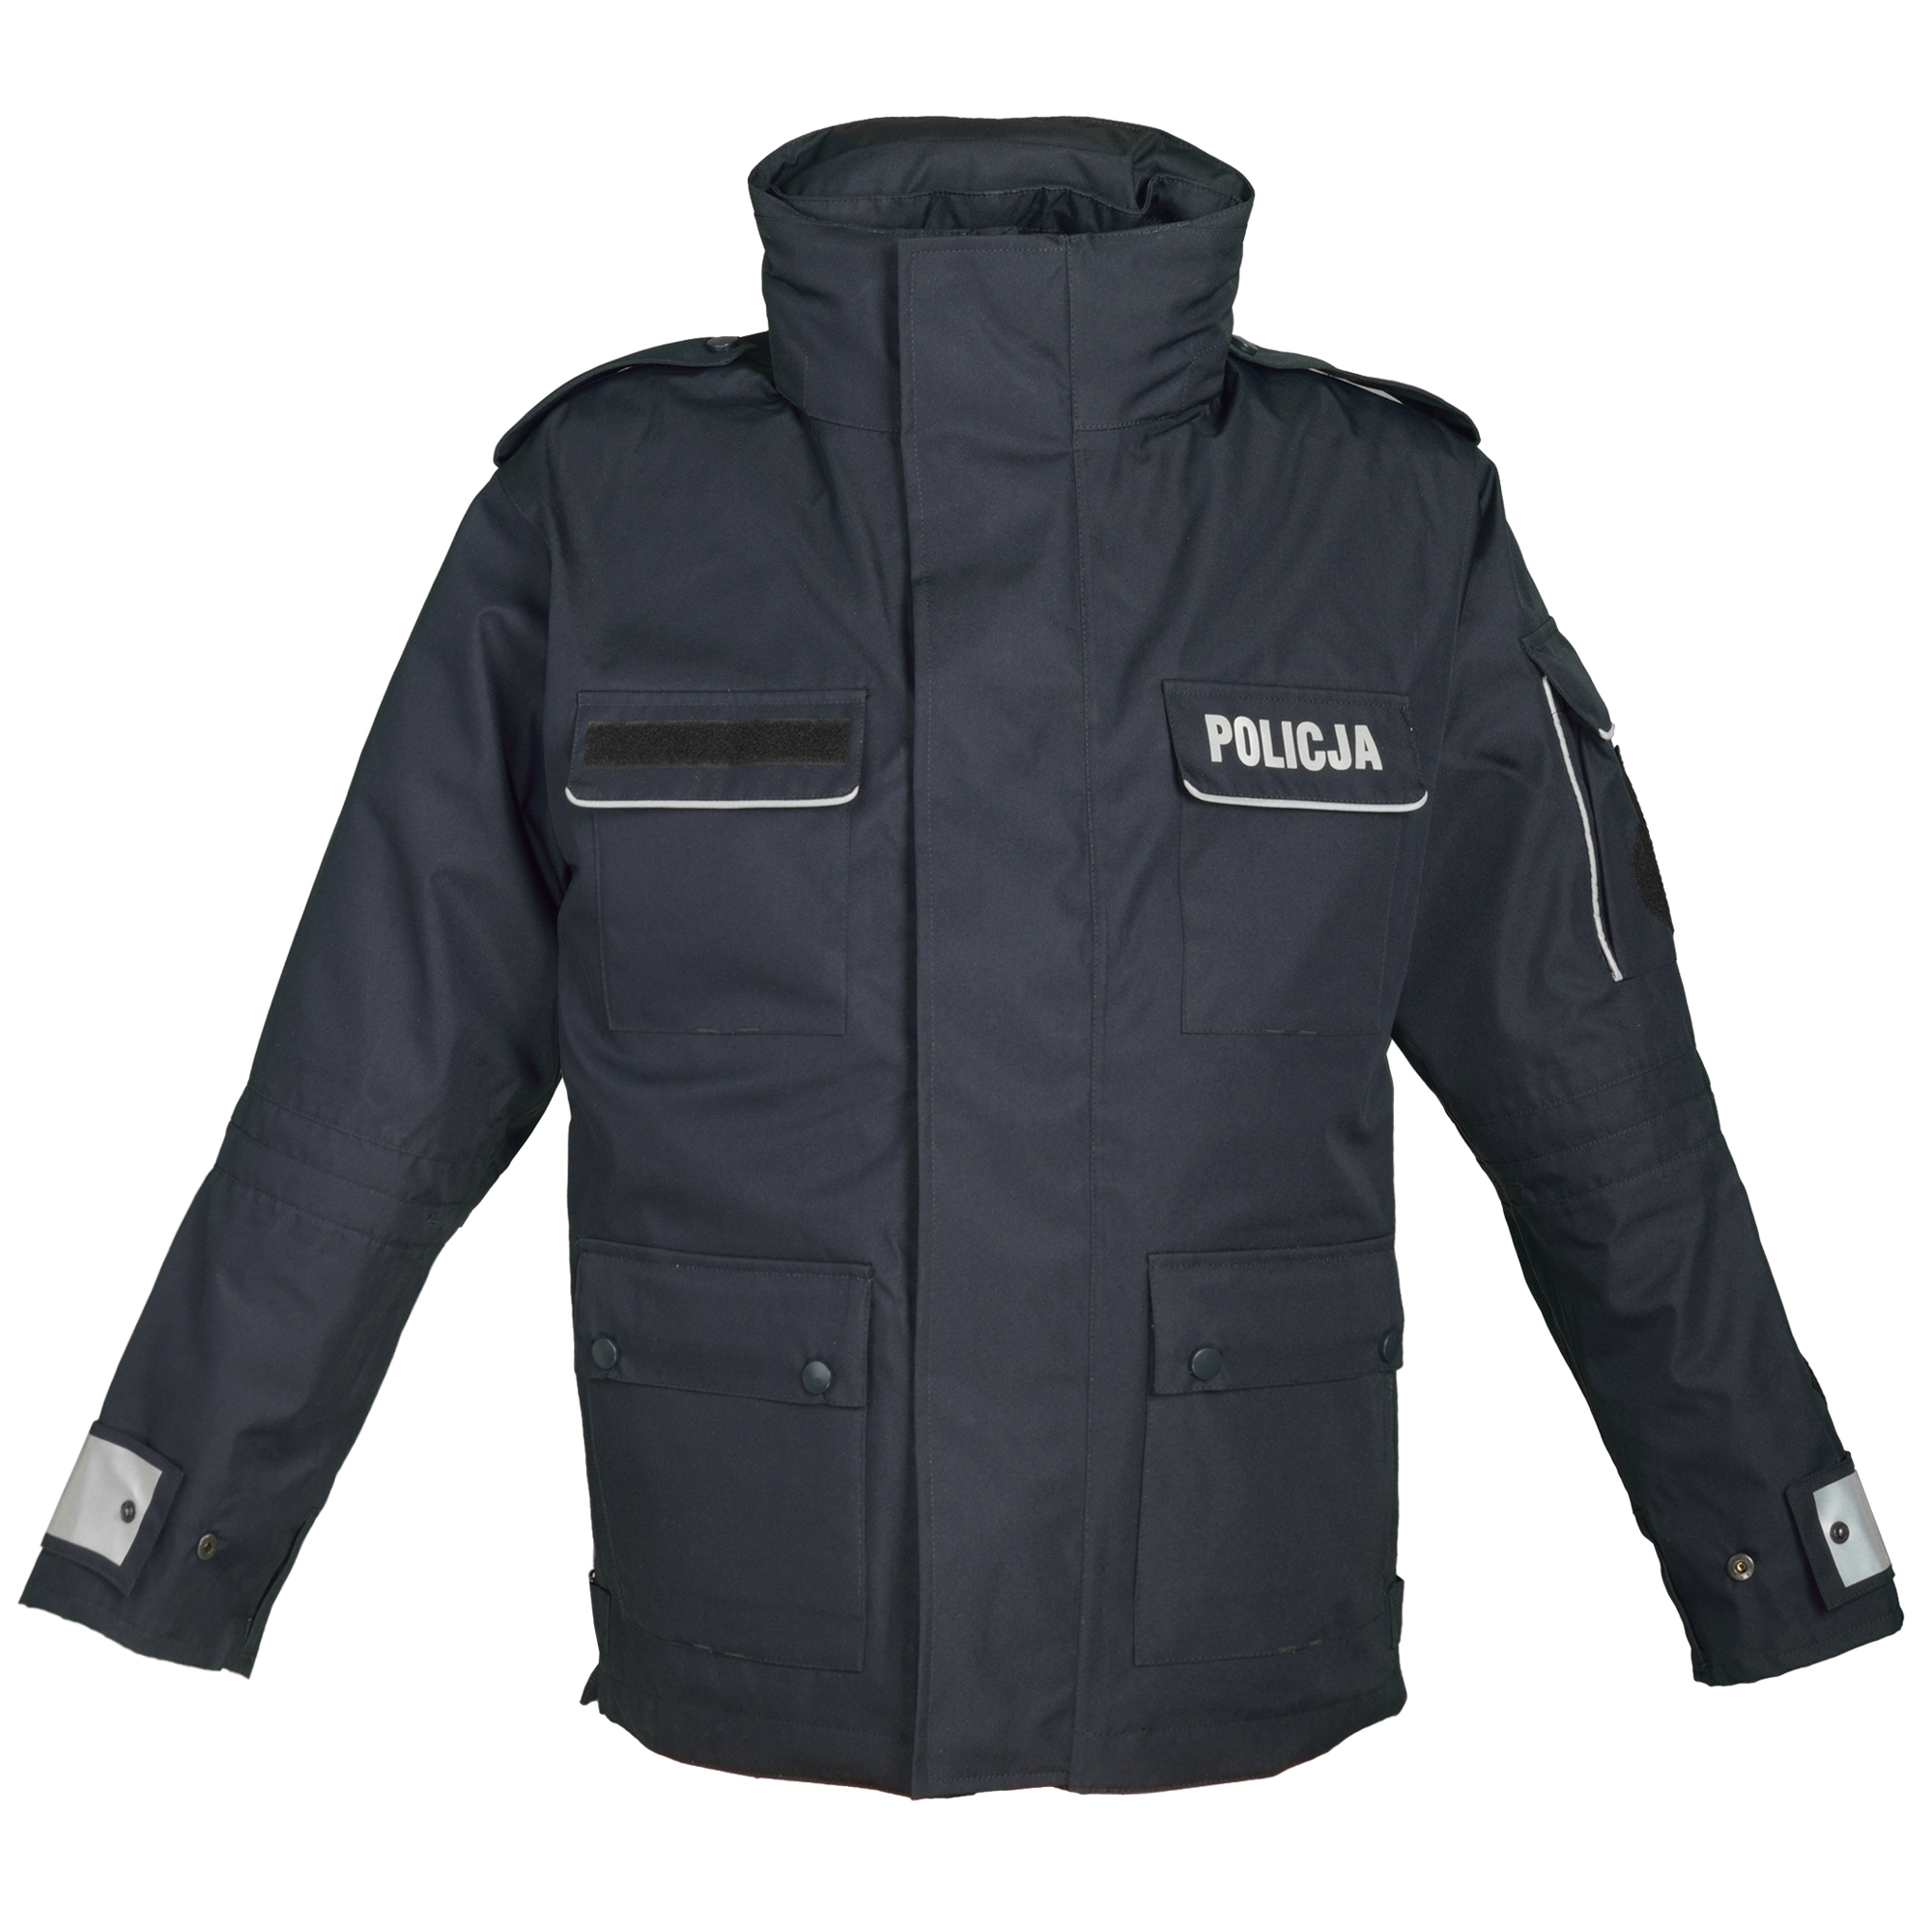 Winter official jacket with warming detachable lining